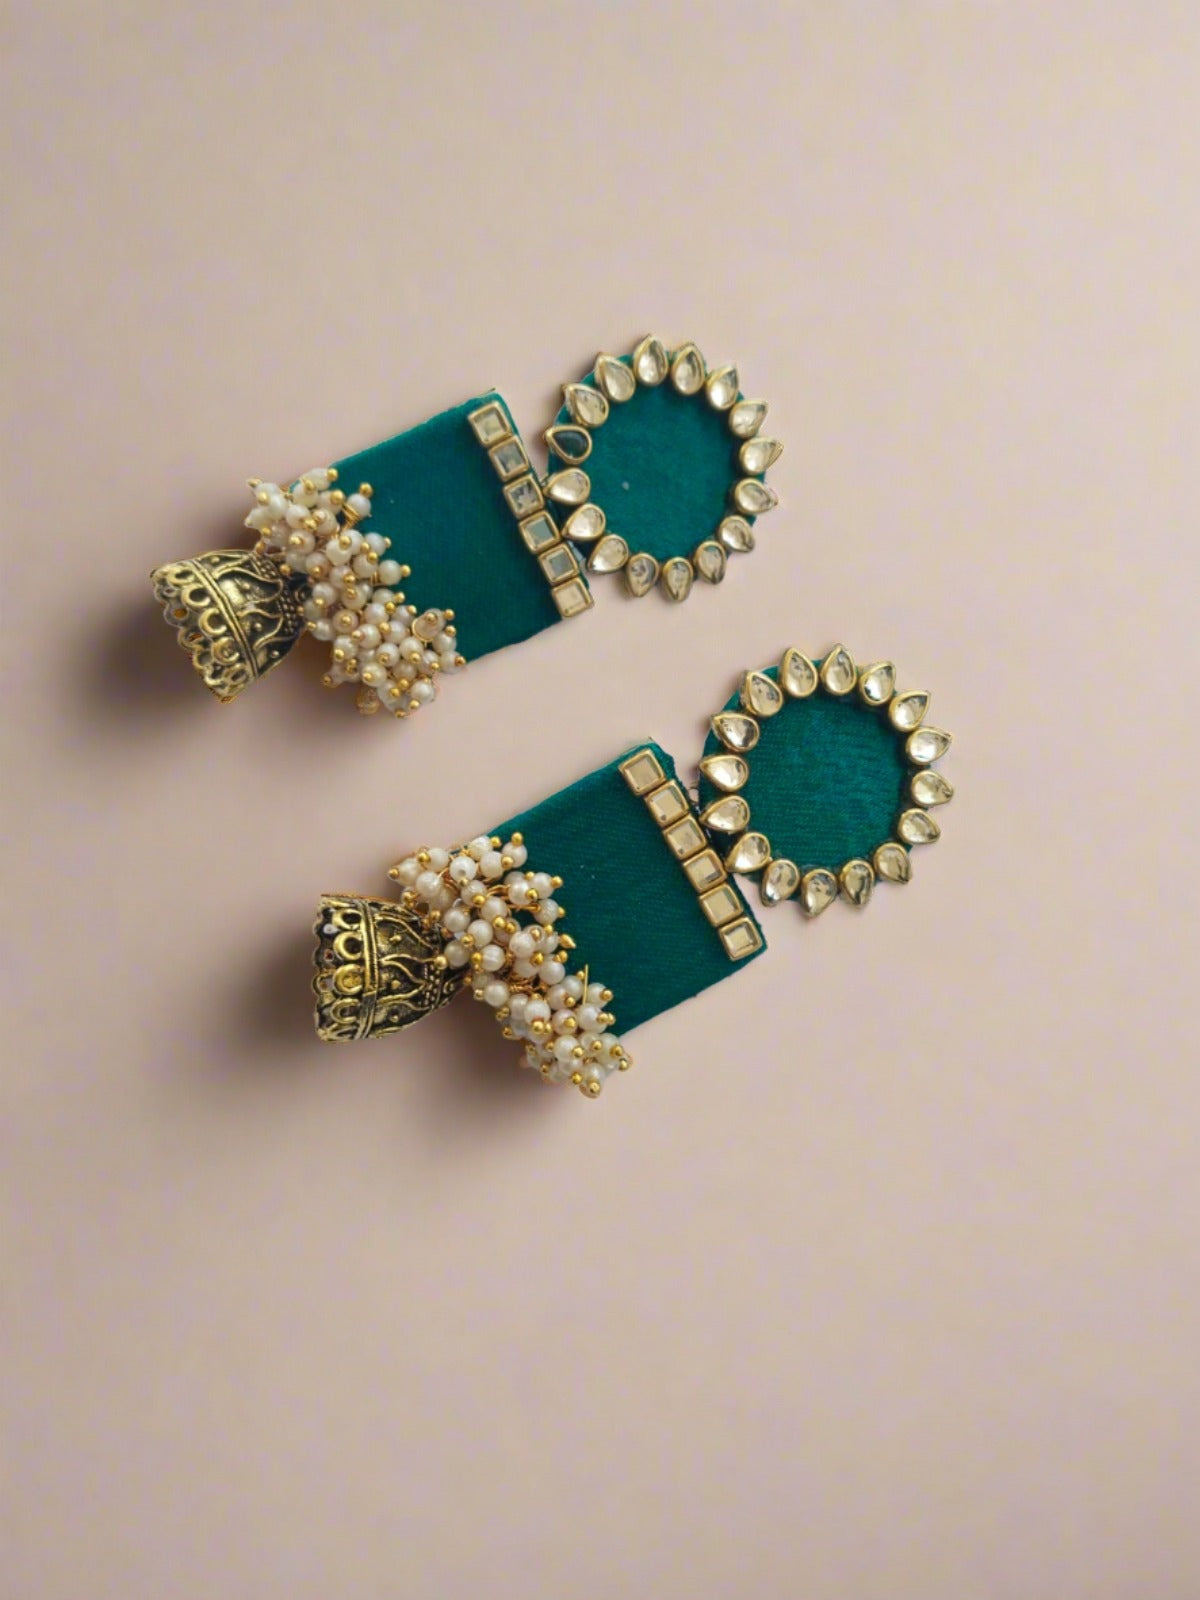 Sea green rectangular jhumka with white and golden beads on white grey backdrop